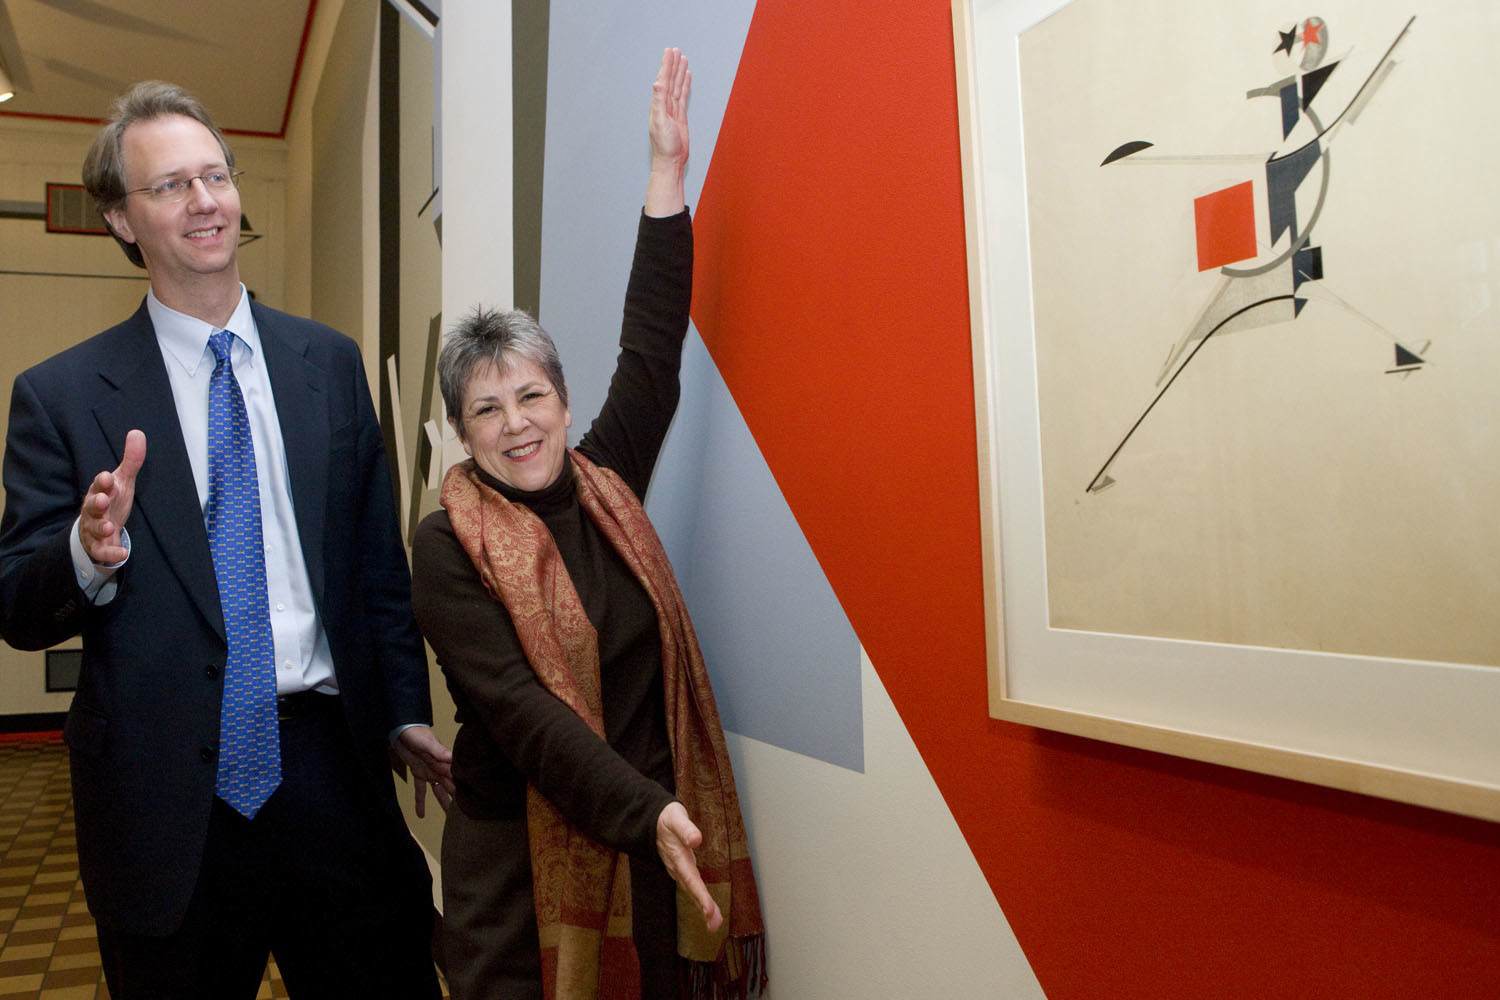 Tom Skalak and Beth Turner show off a painting hanging on a wall